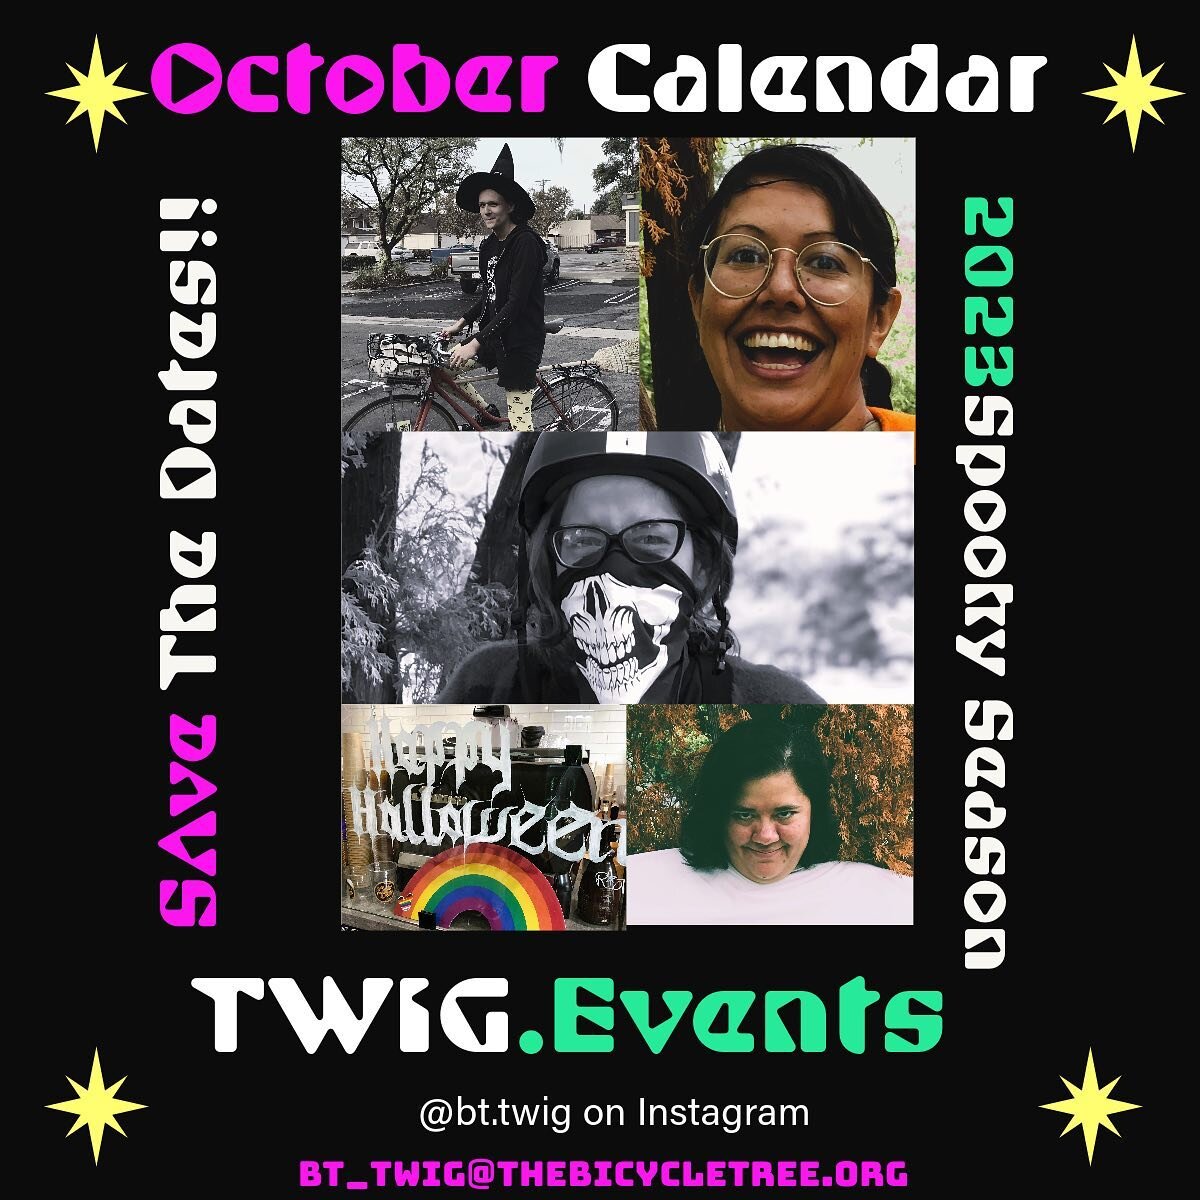 We&rsquo;re excited for October! check out what we have lined up➡️

Flyers with more details coming soon&hellip;

Event Locations:
Oct 10&amp;17  @bicycletree
Oct 19- Zine release party @libromobile 
Oct 31- TBD but either start at The Bicycle Tree o